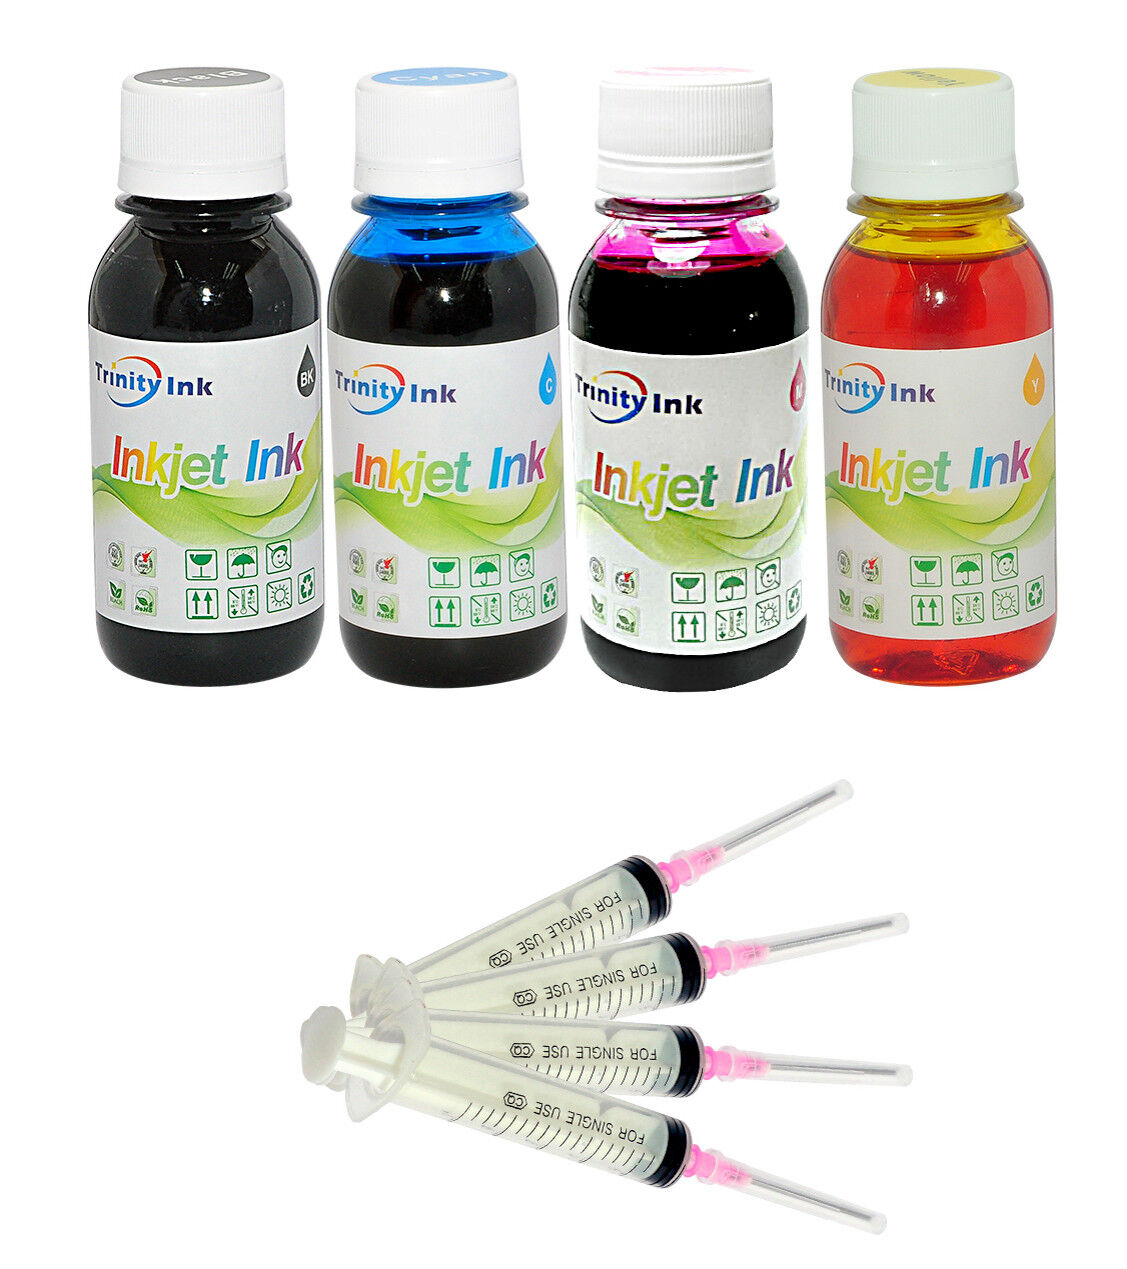 4x100ml Refill Ink for PG-260 XL CL-261 XL Canon Pixma TR7020 TS5320 TS6420